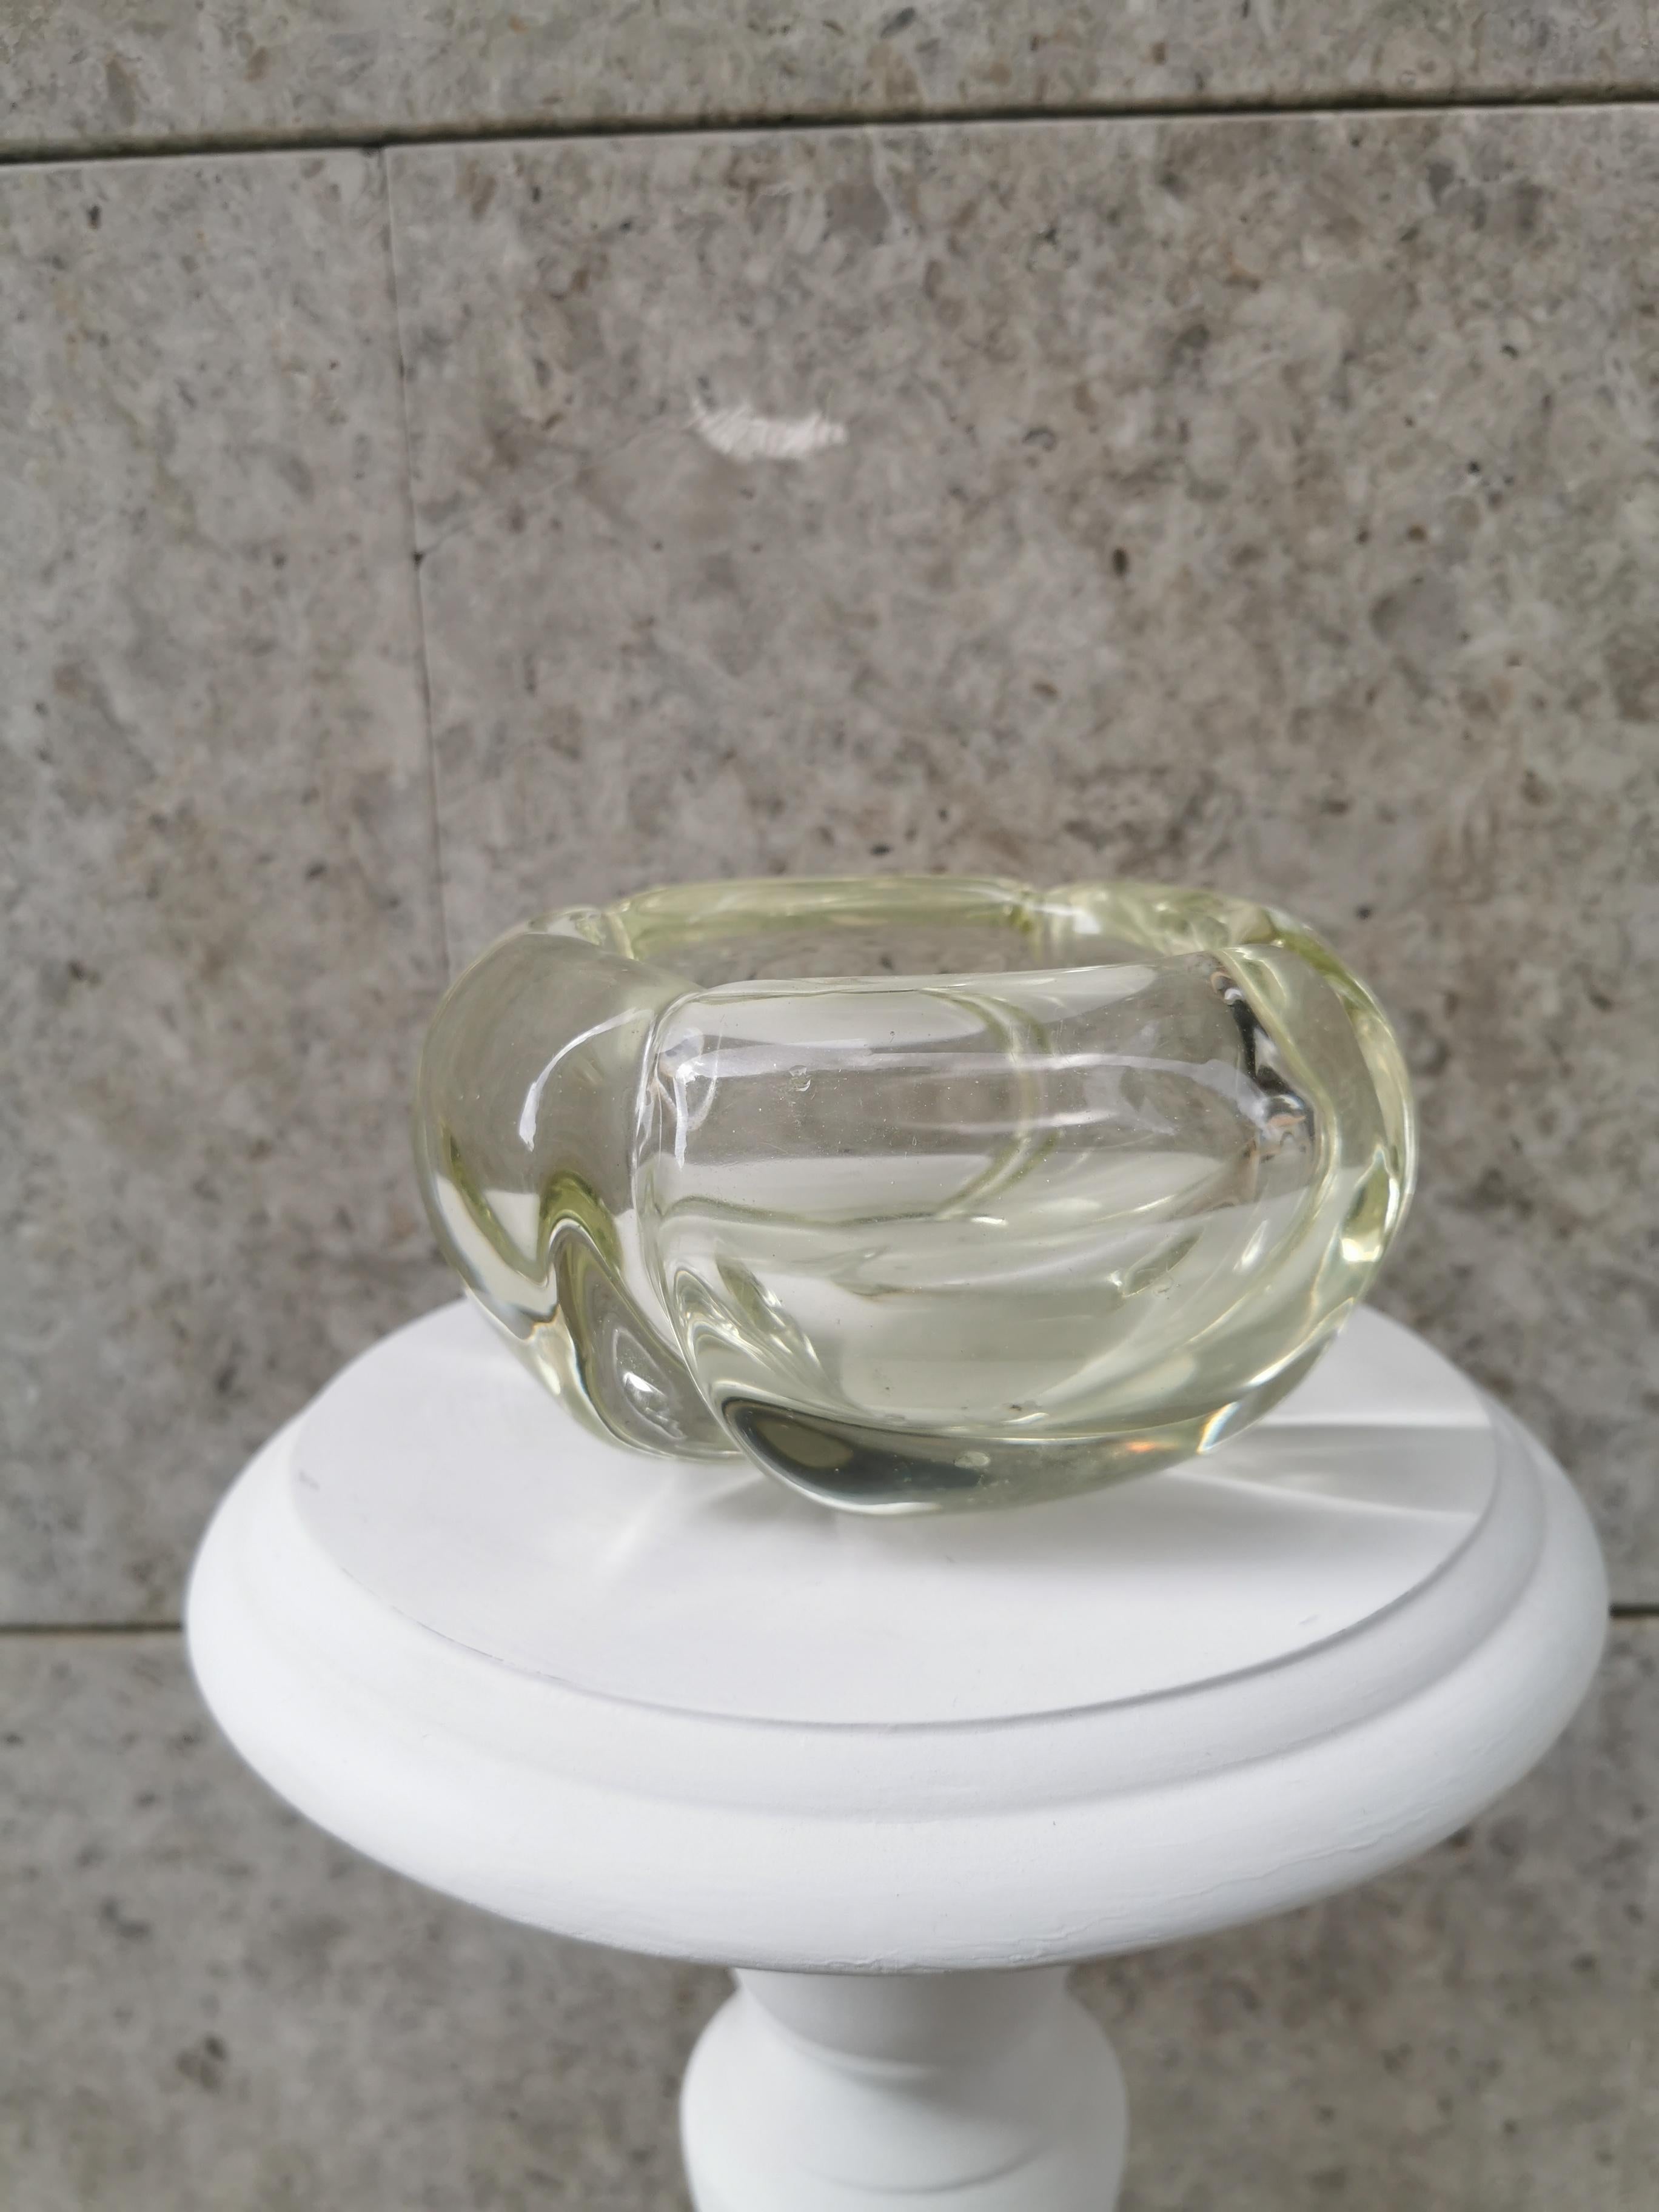 Very thick transparent glass ashtray.
Object attributed to Barbini Murano, 1970s production.
Good state of preservation, with normal signs of aging, but really minor.